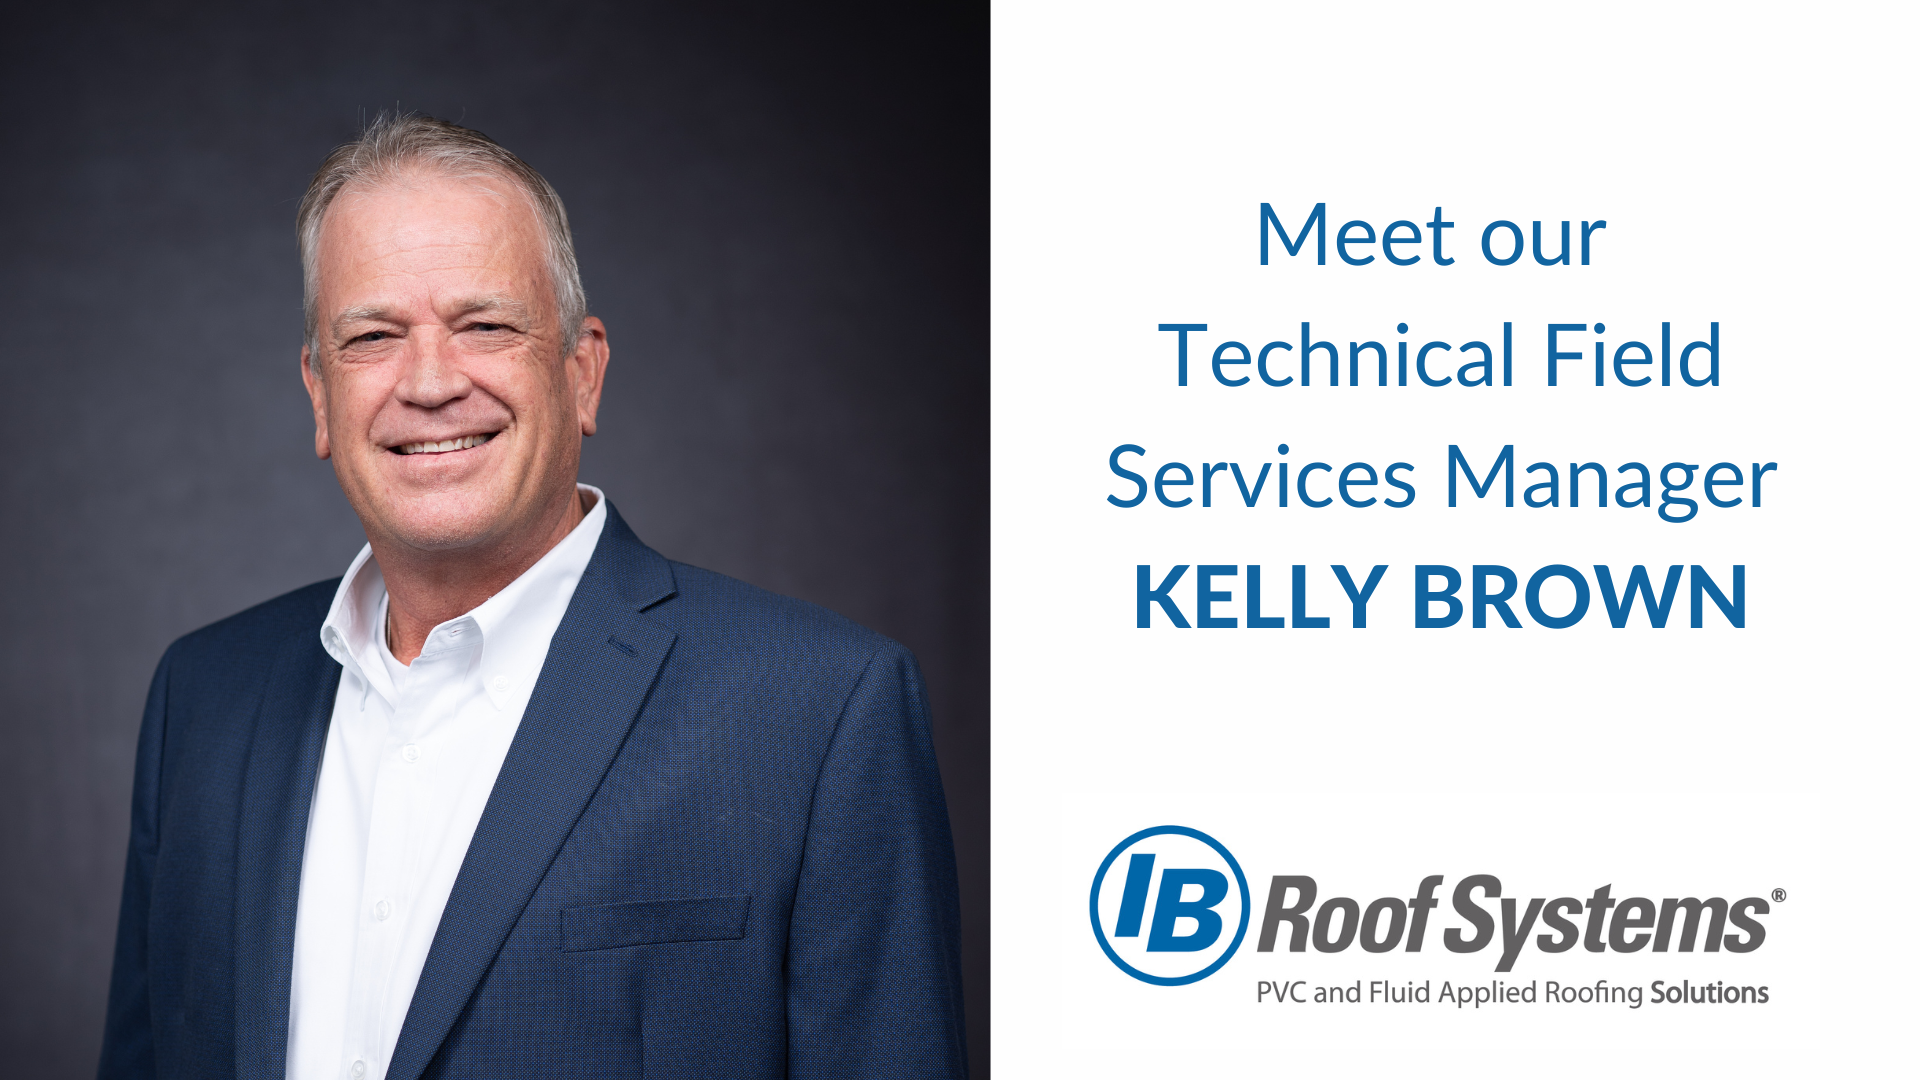 IB Roof Systems, Inc. today announced it has named Kelly Brown as Technical Field Services Manager.